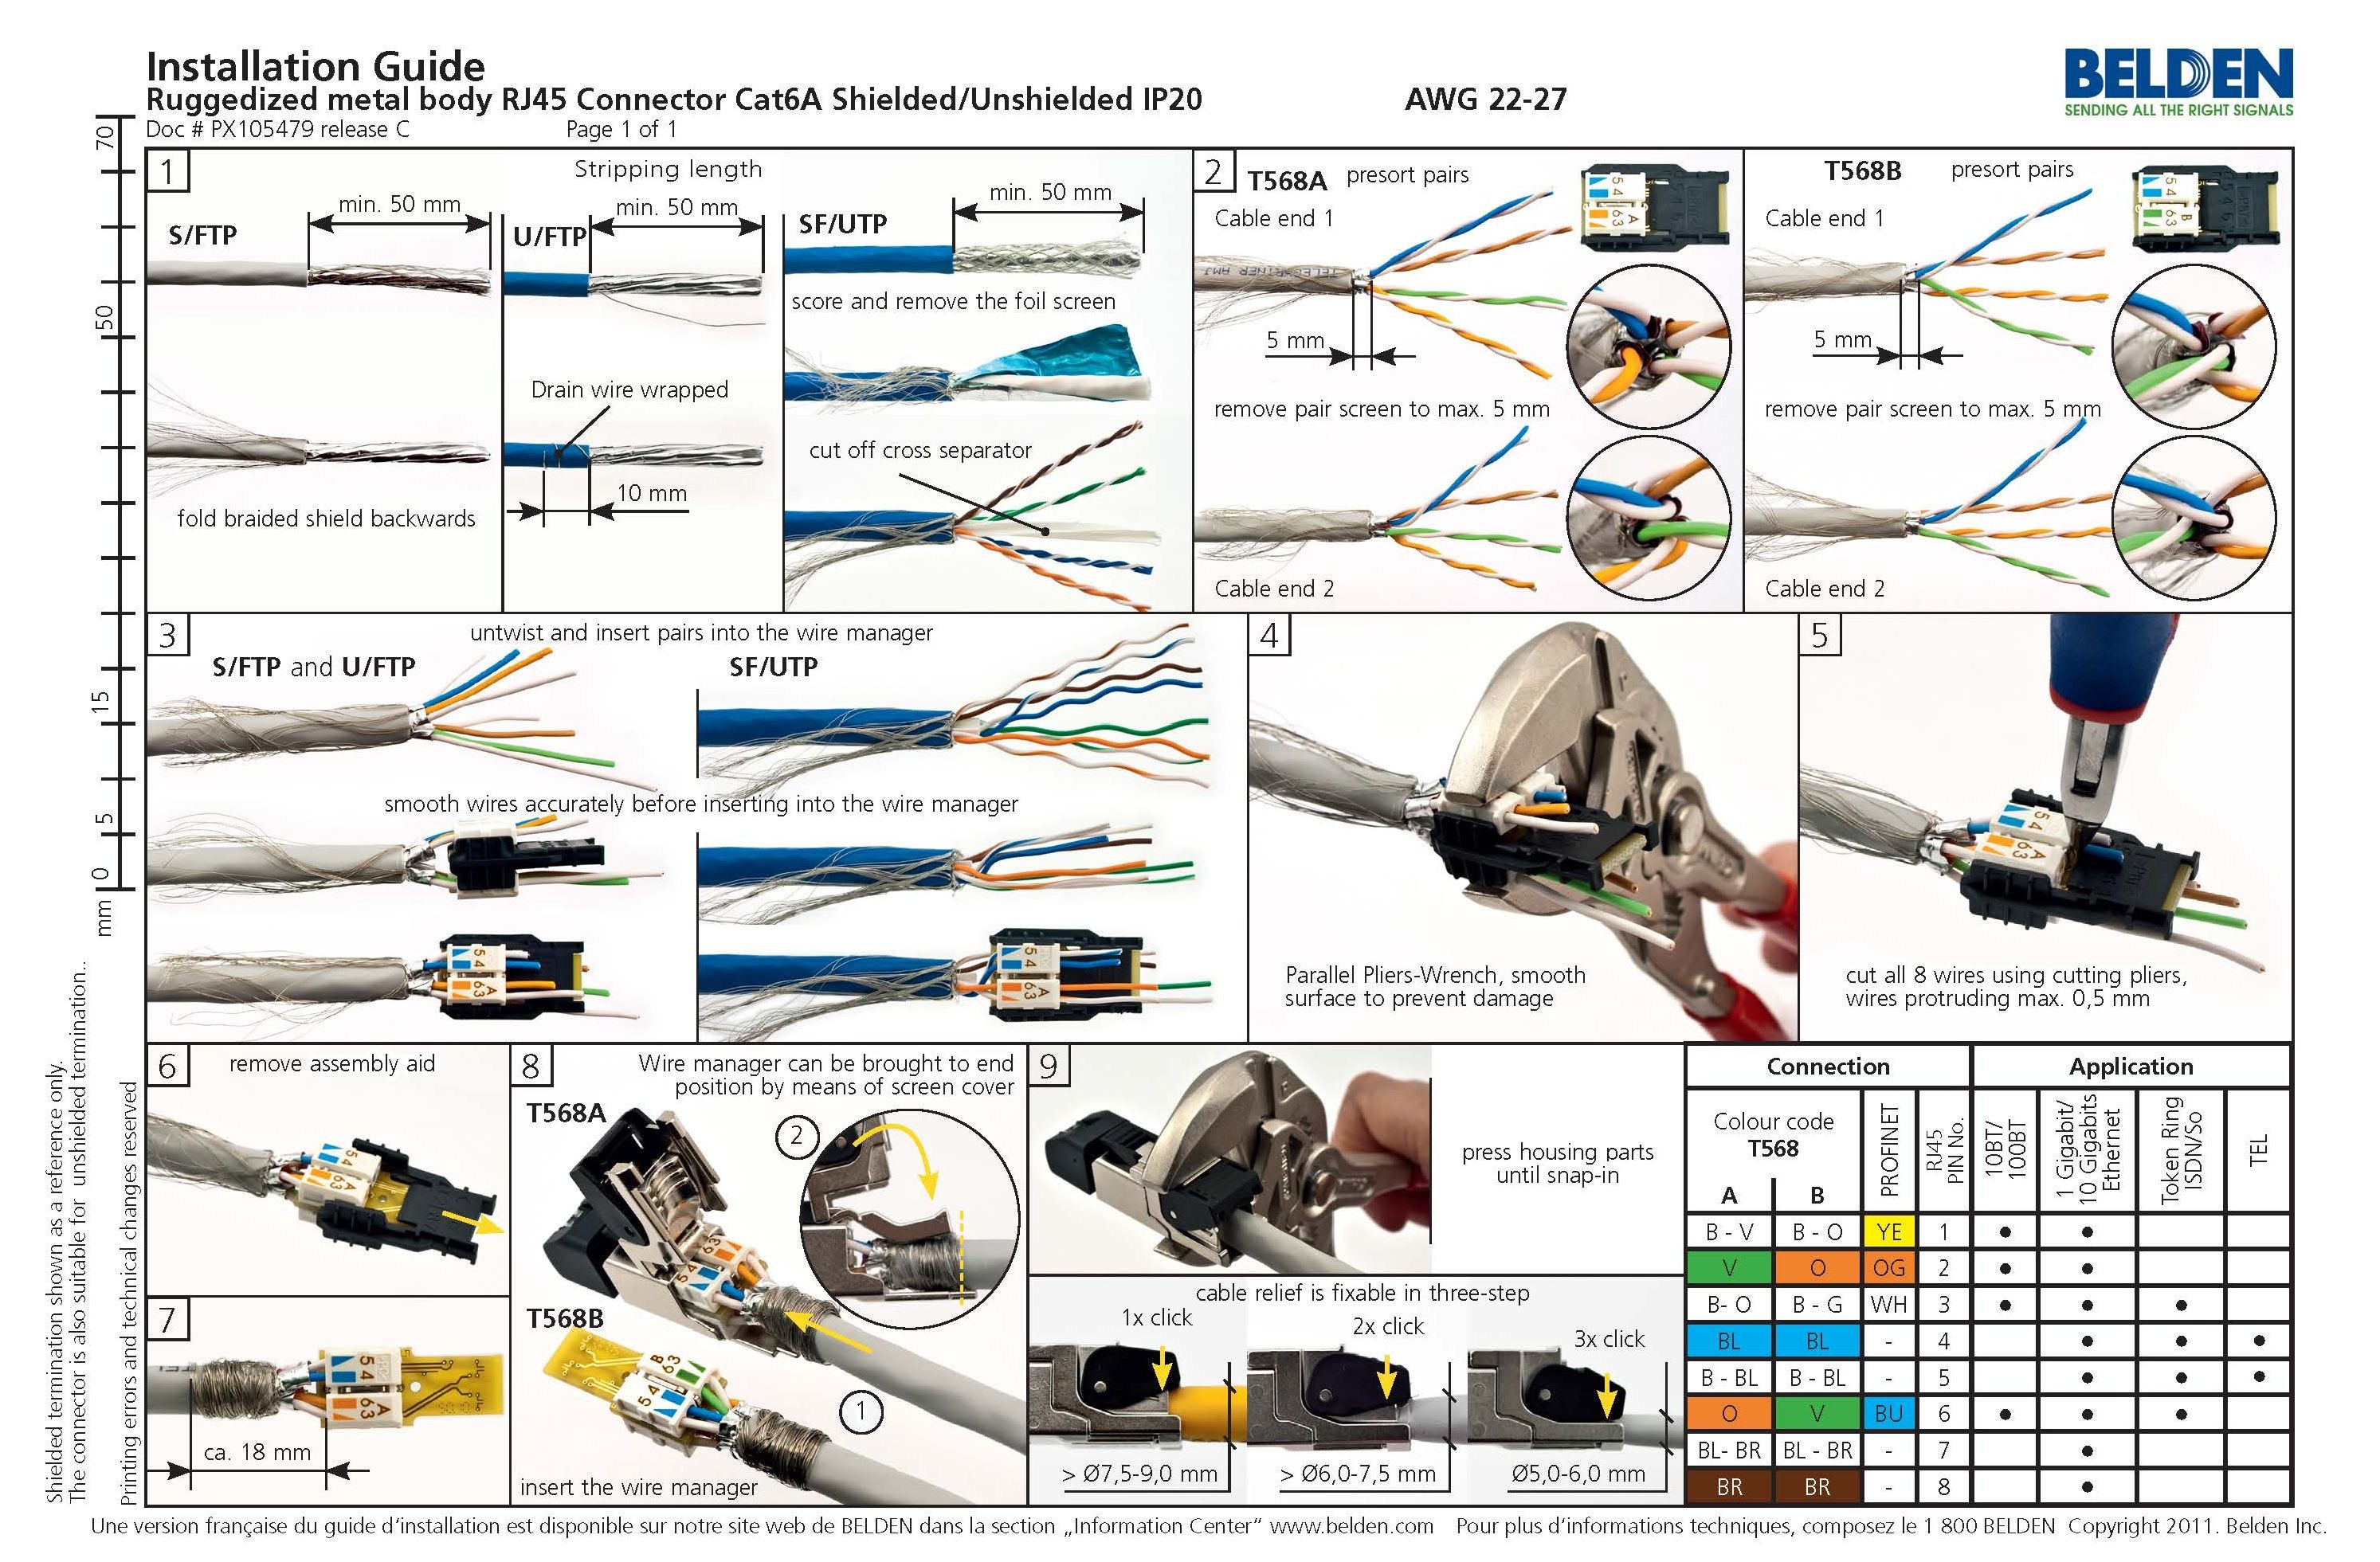 Cat6 Wiring Diagram Wall Plate Stunning Rj45 Cat 6 Wiring Diagram S Everything You Need to